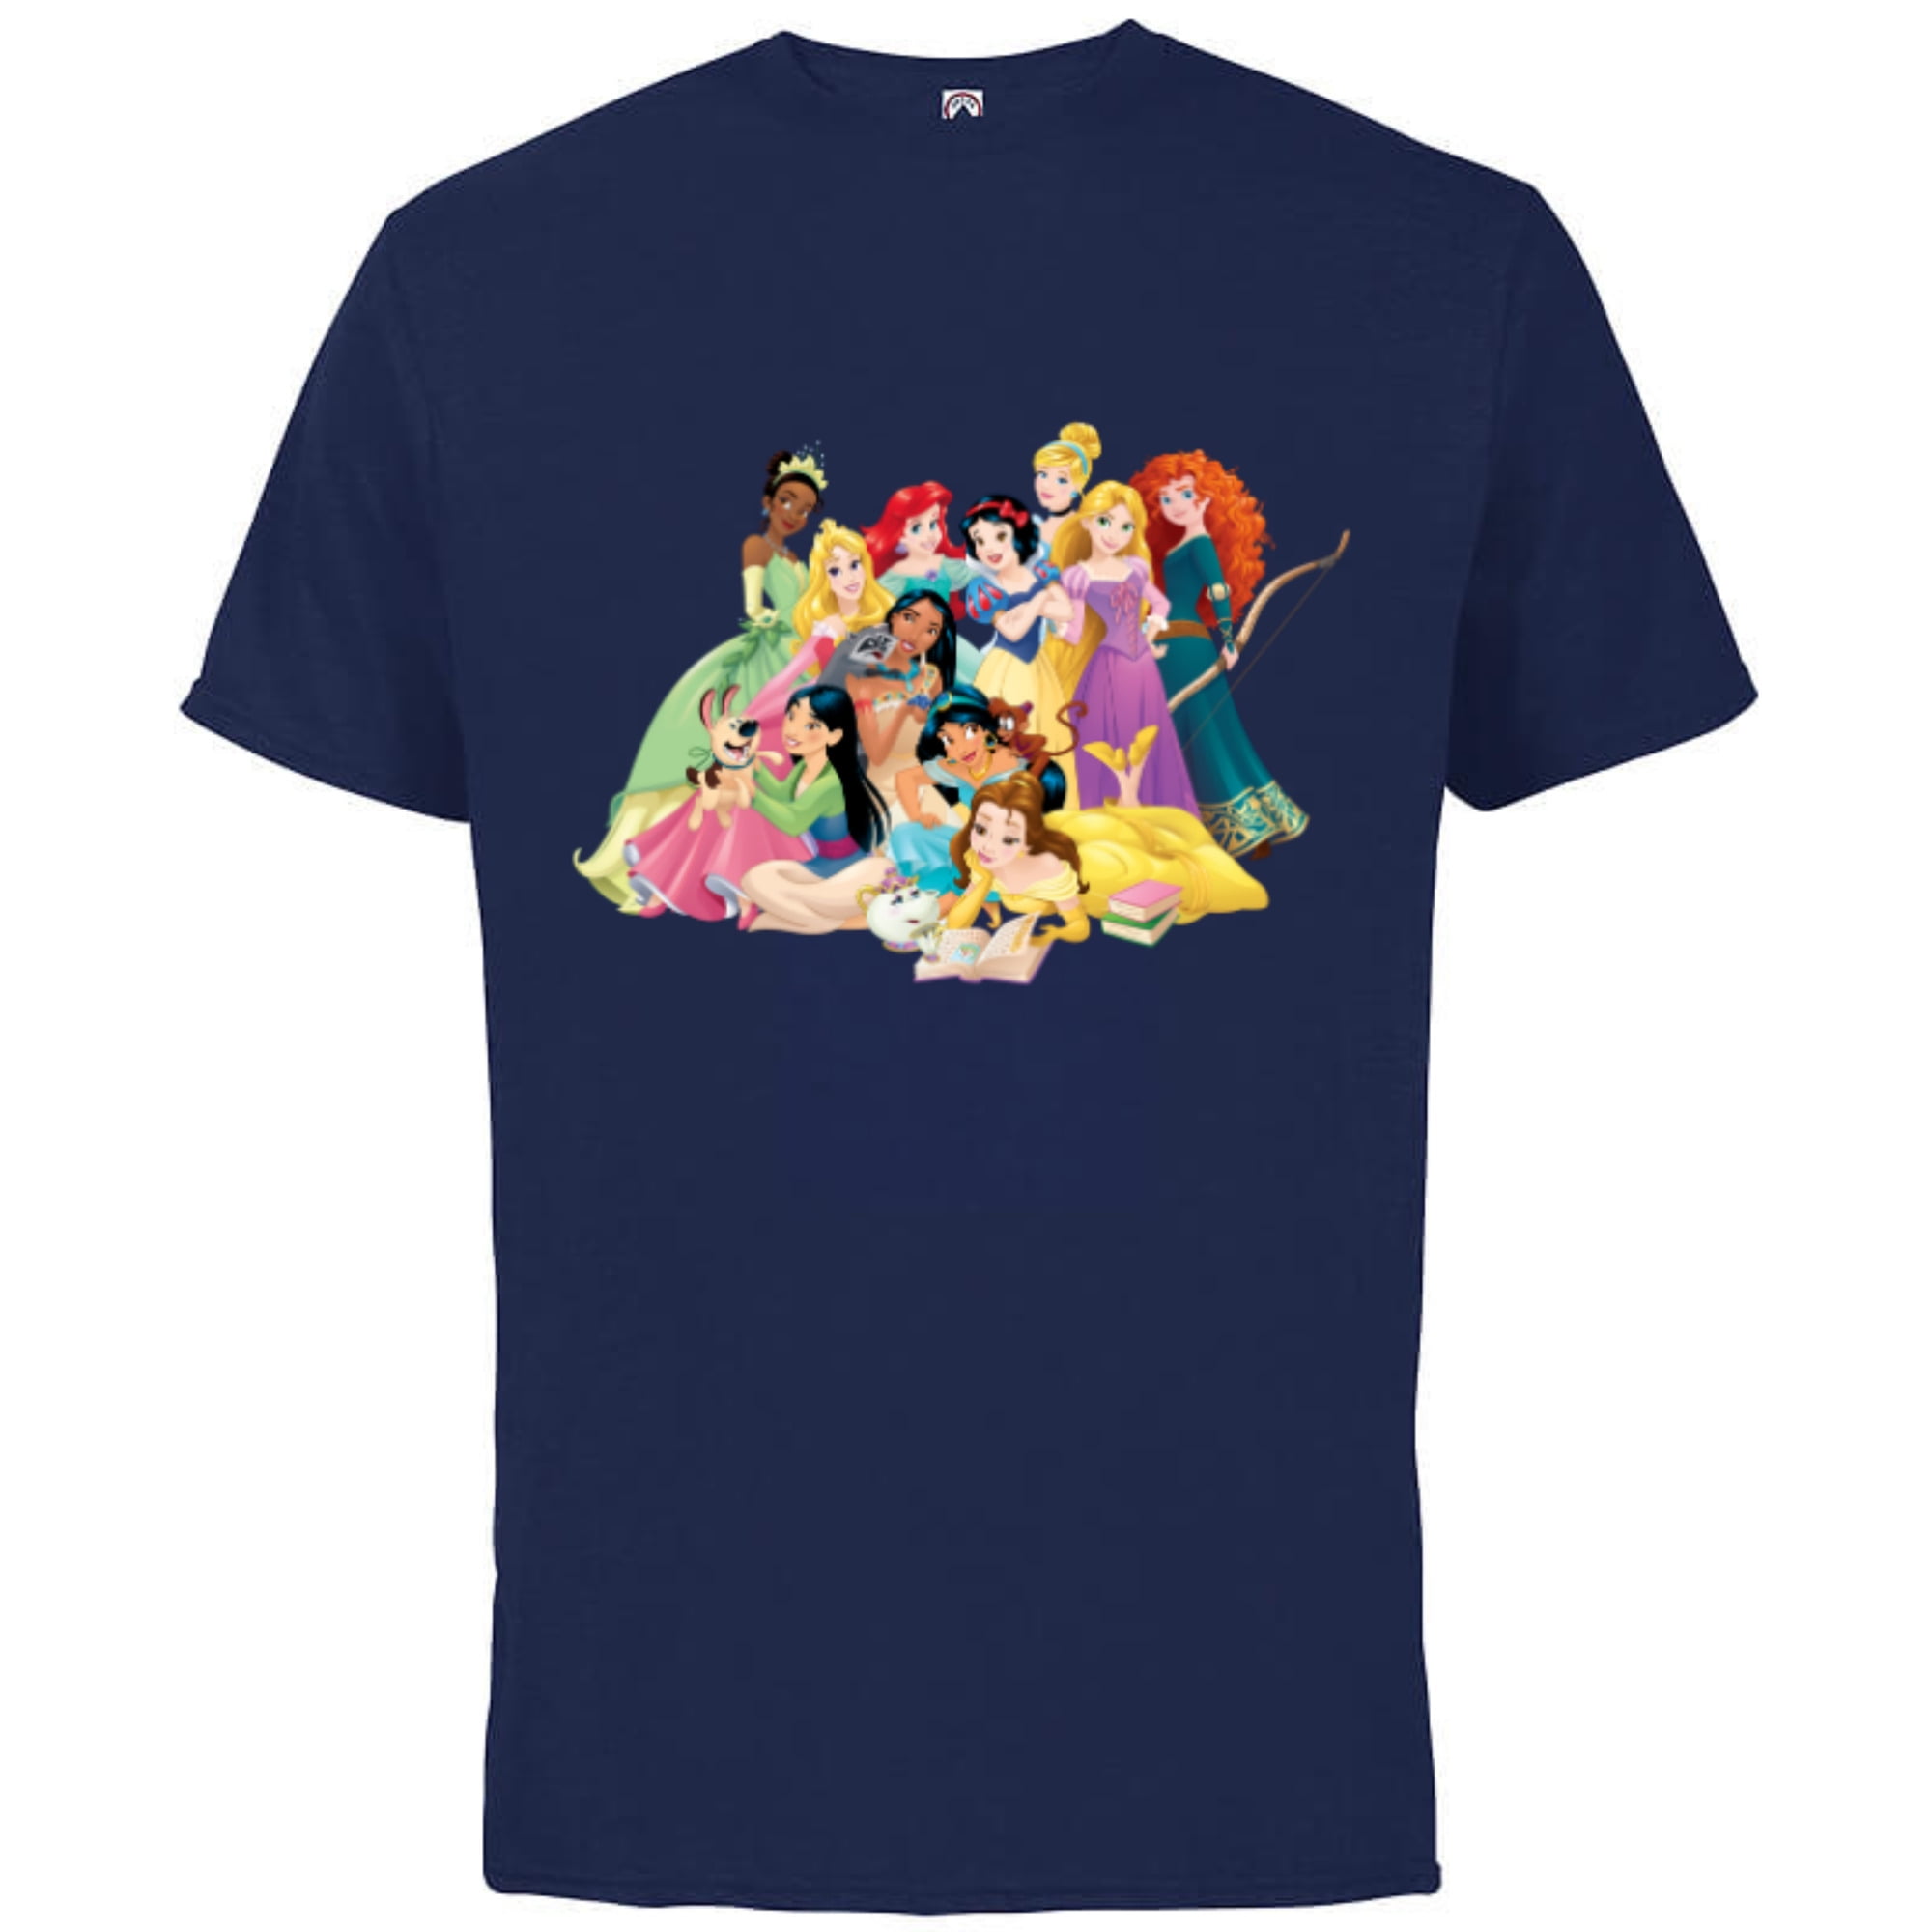 Disney Princess - Short Photo Customized-Athletic T-Shirt Sleeve Adults- Navy Cotton Group for